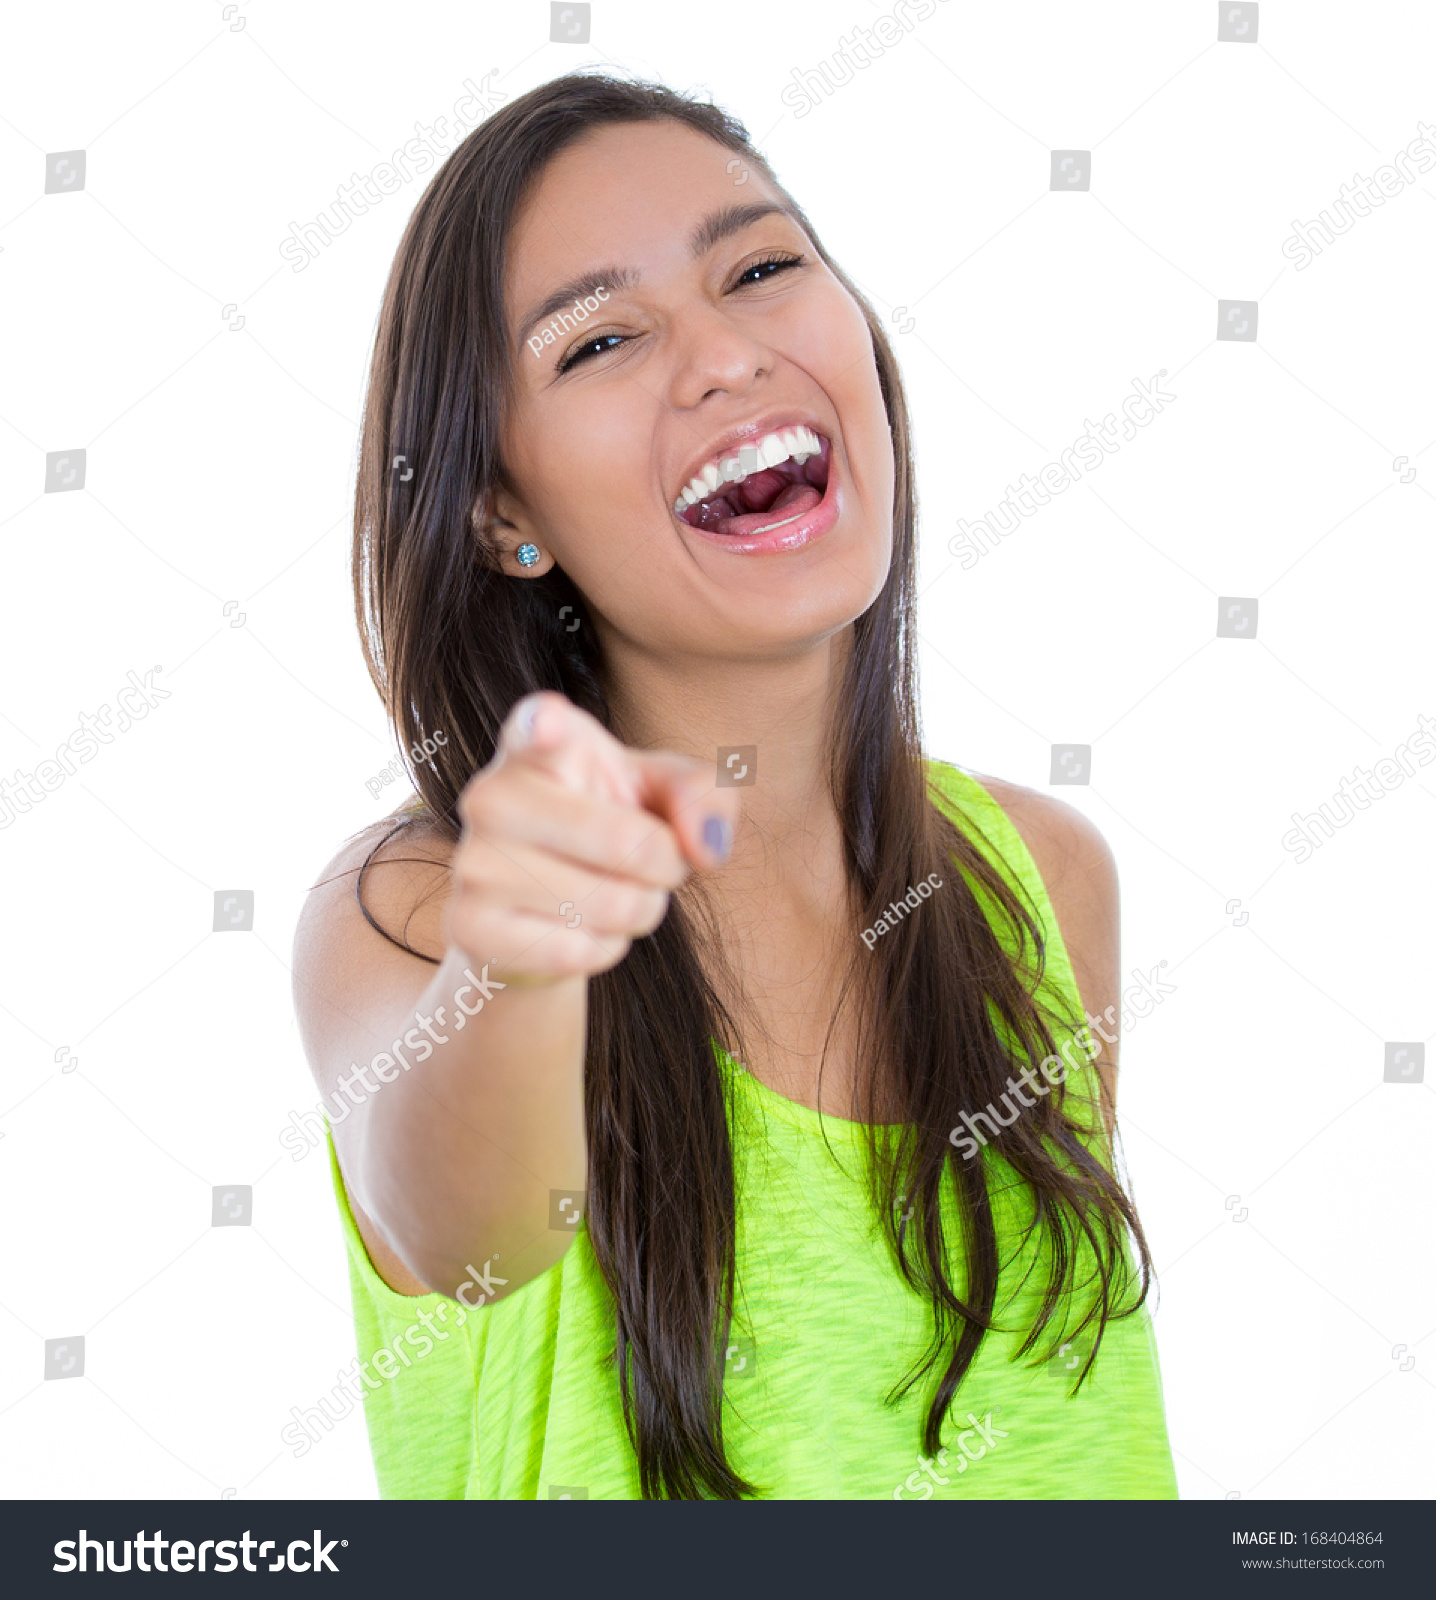 Closeup Portrait Of Young Beautiful Excited Happy Woman Smiling Laughing Pointing Finger 5807